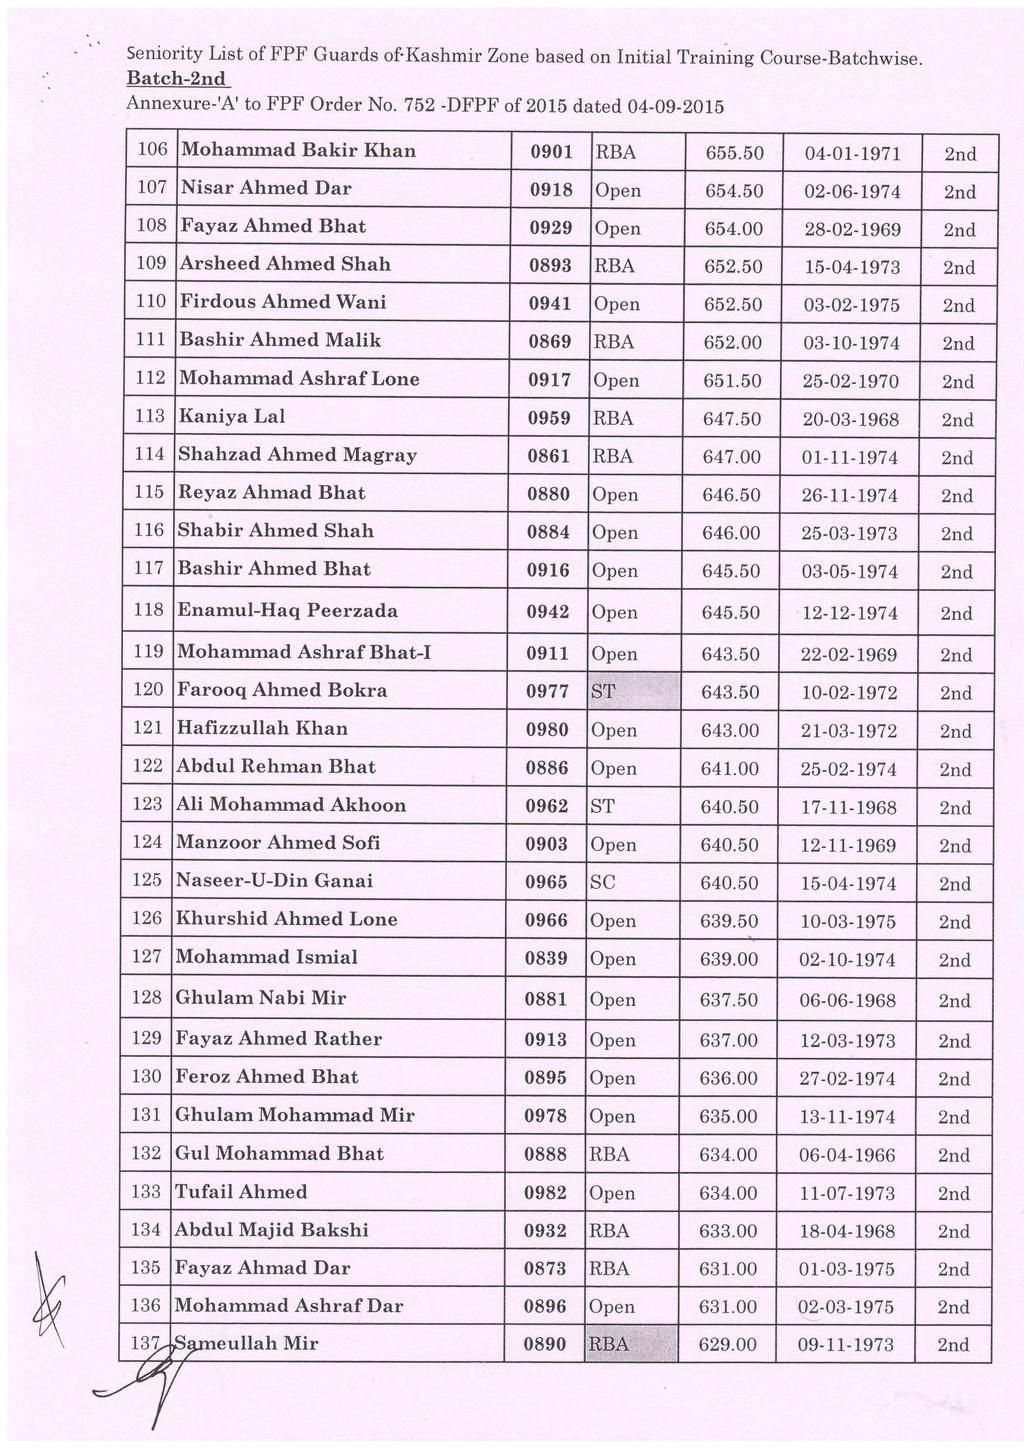 " ' Seniority List of FPF Guards of'kashmir Zone based on Initial Training Course-Batchwise. Batch- Annexure-W to FPF Order No.